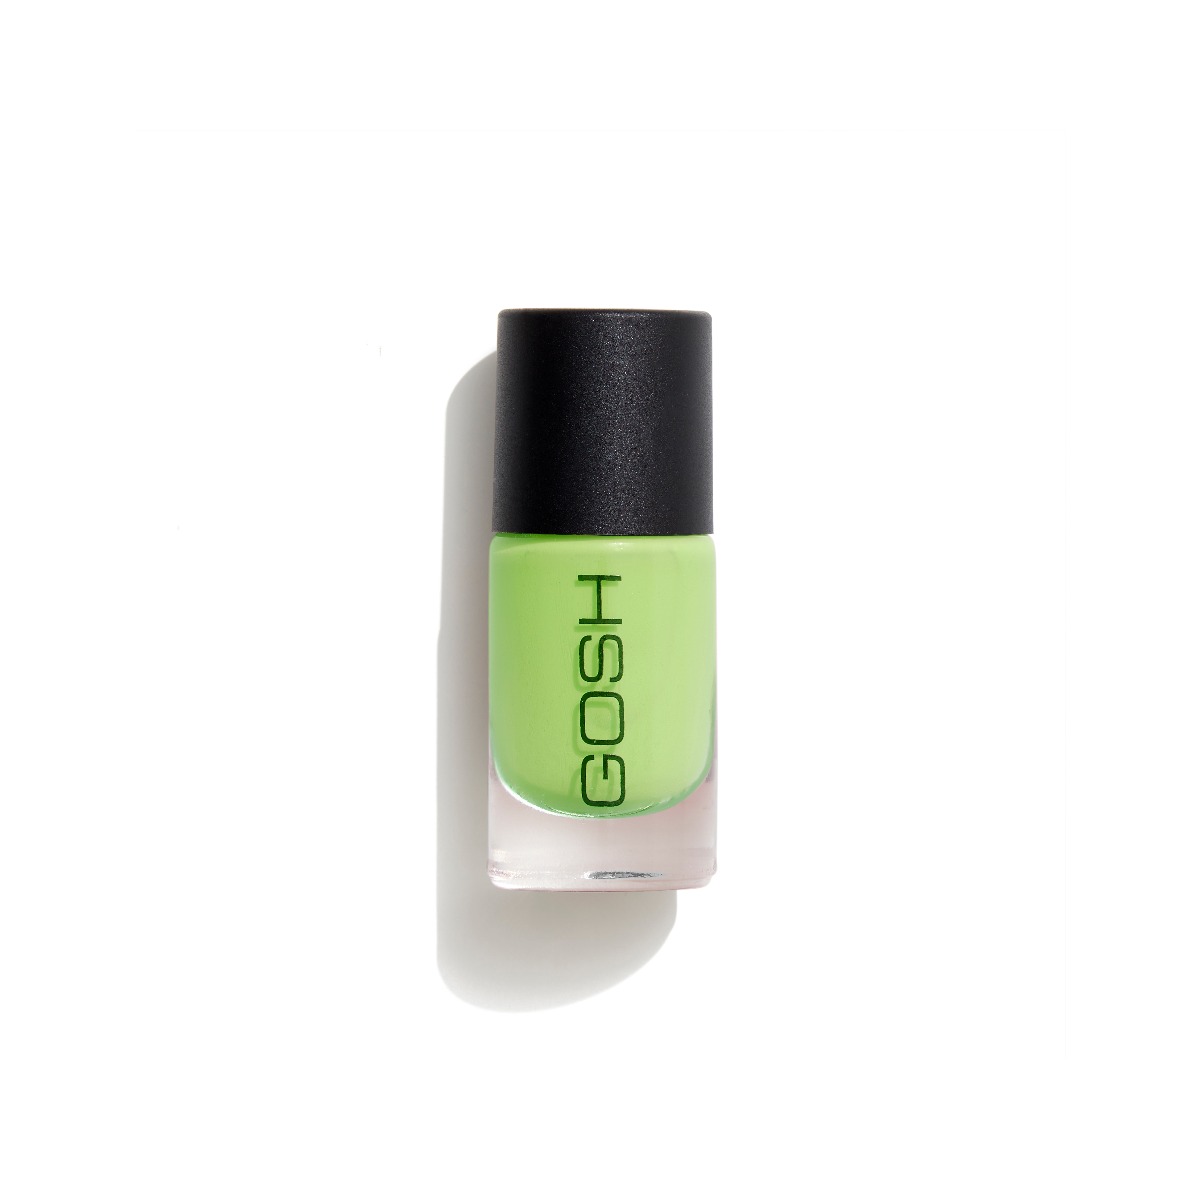 Nail Lacquer - 606 Early Green